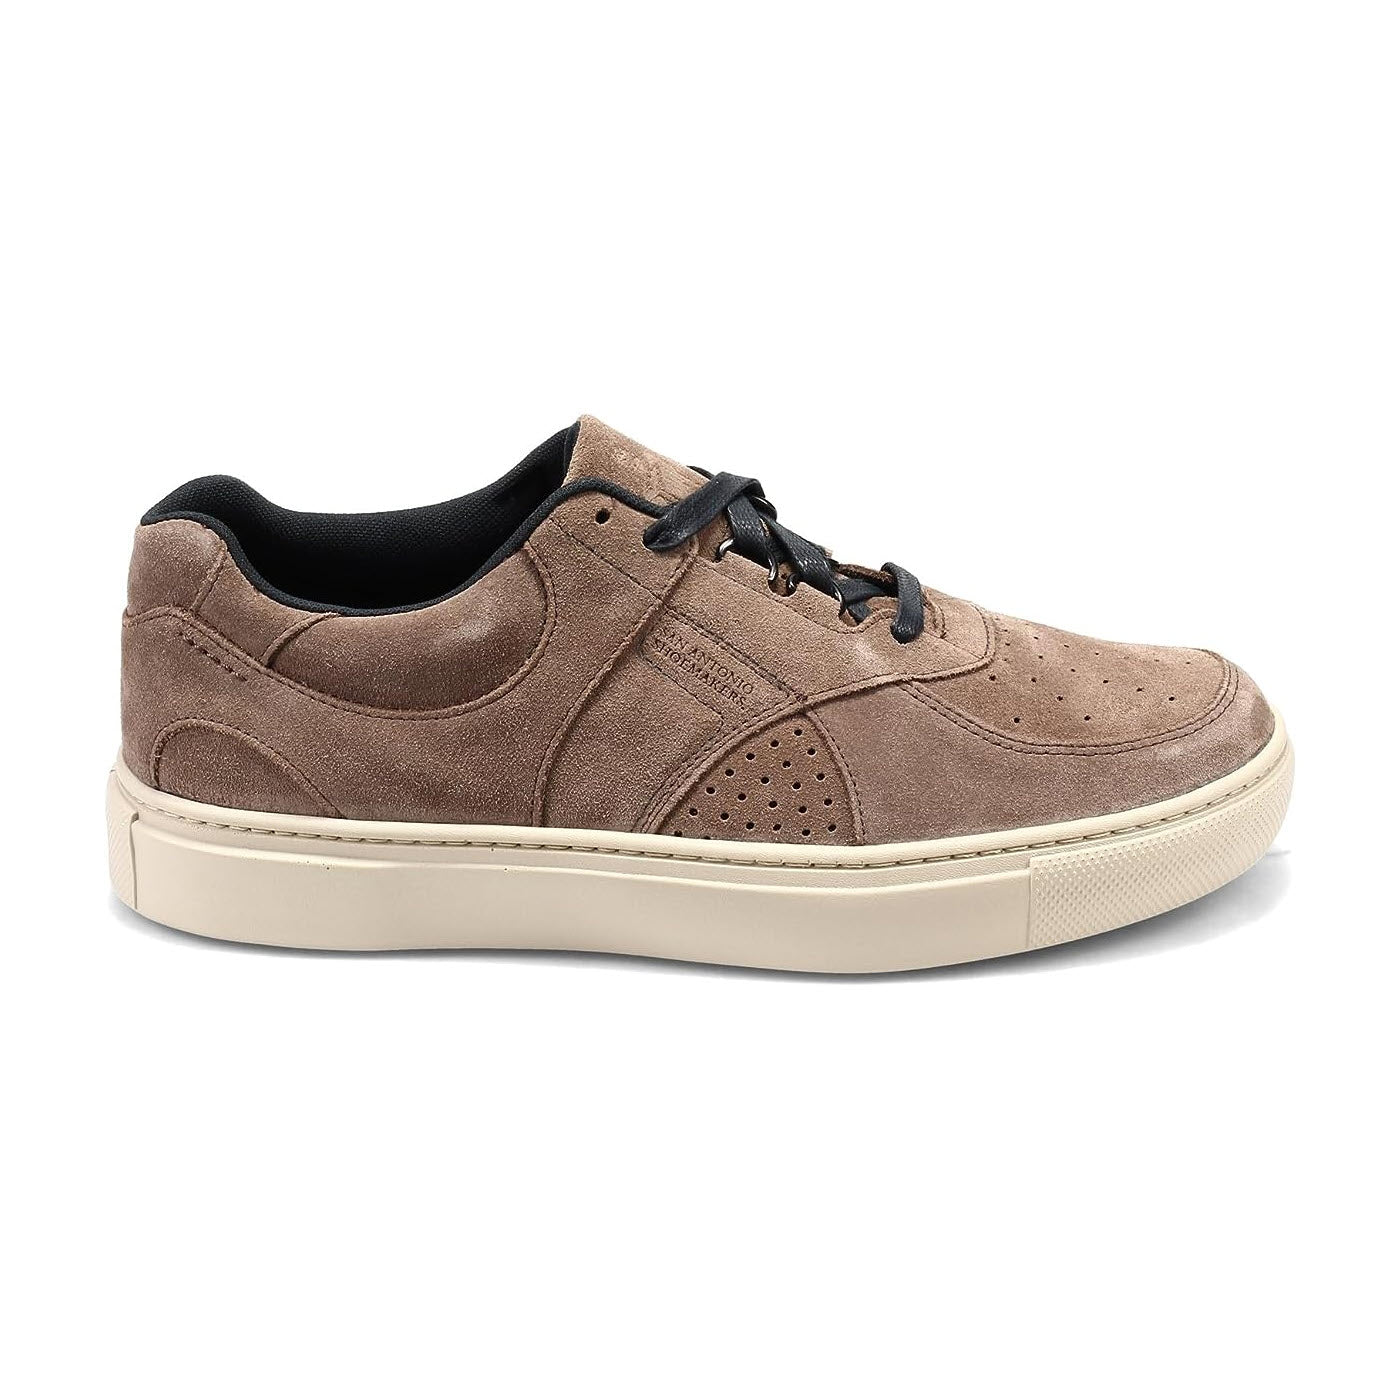 A single SAS High Street Oxford Almond - Mens sneaker with black laces and a removable cushioned footbed, displayed against a white background.